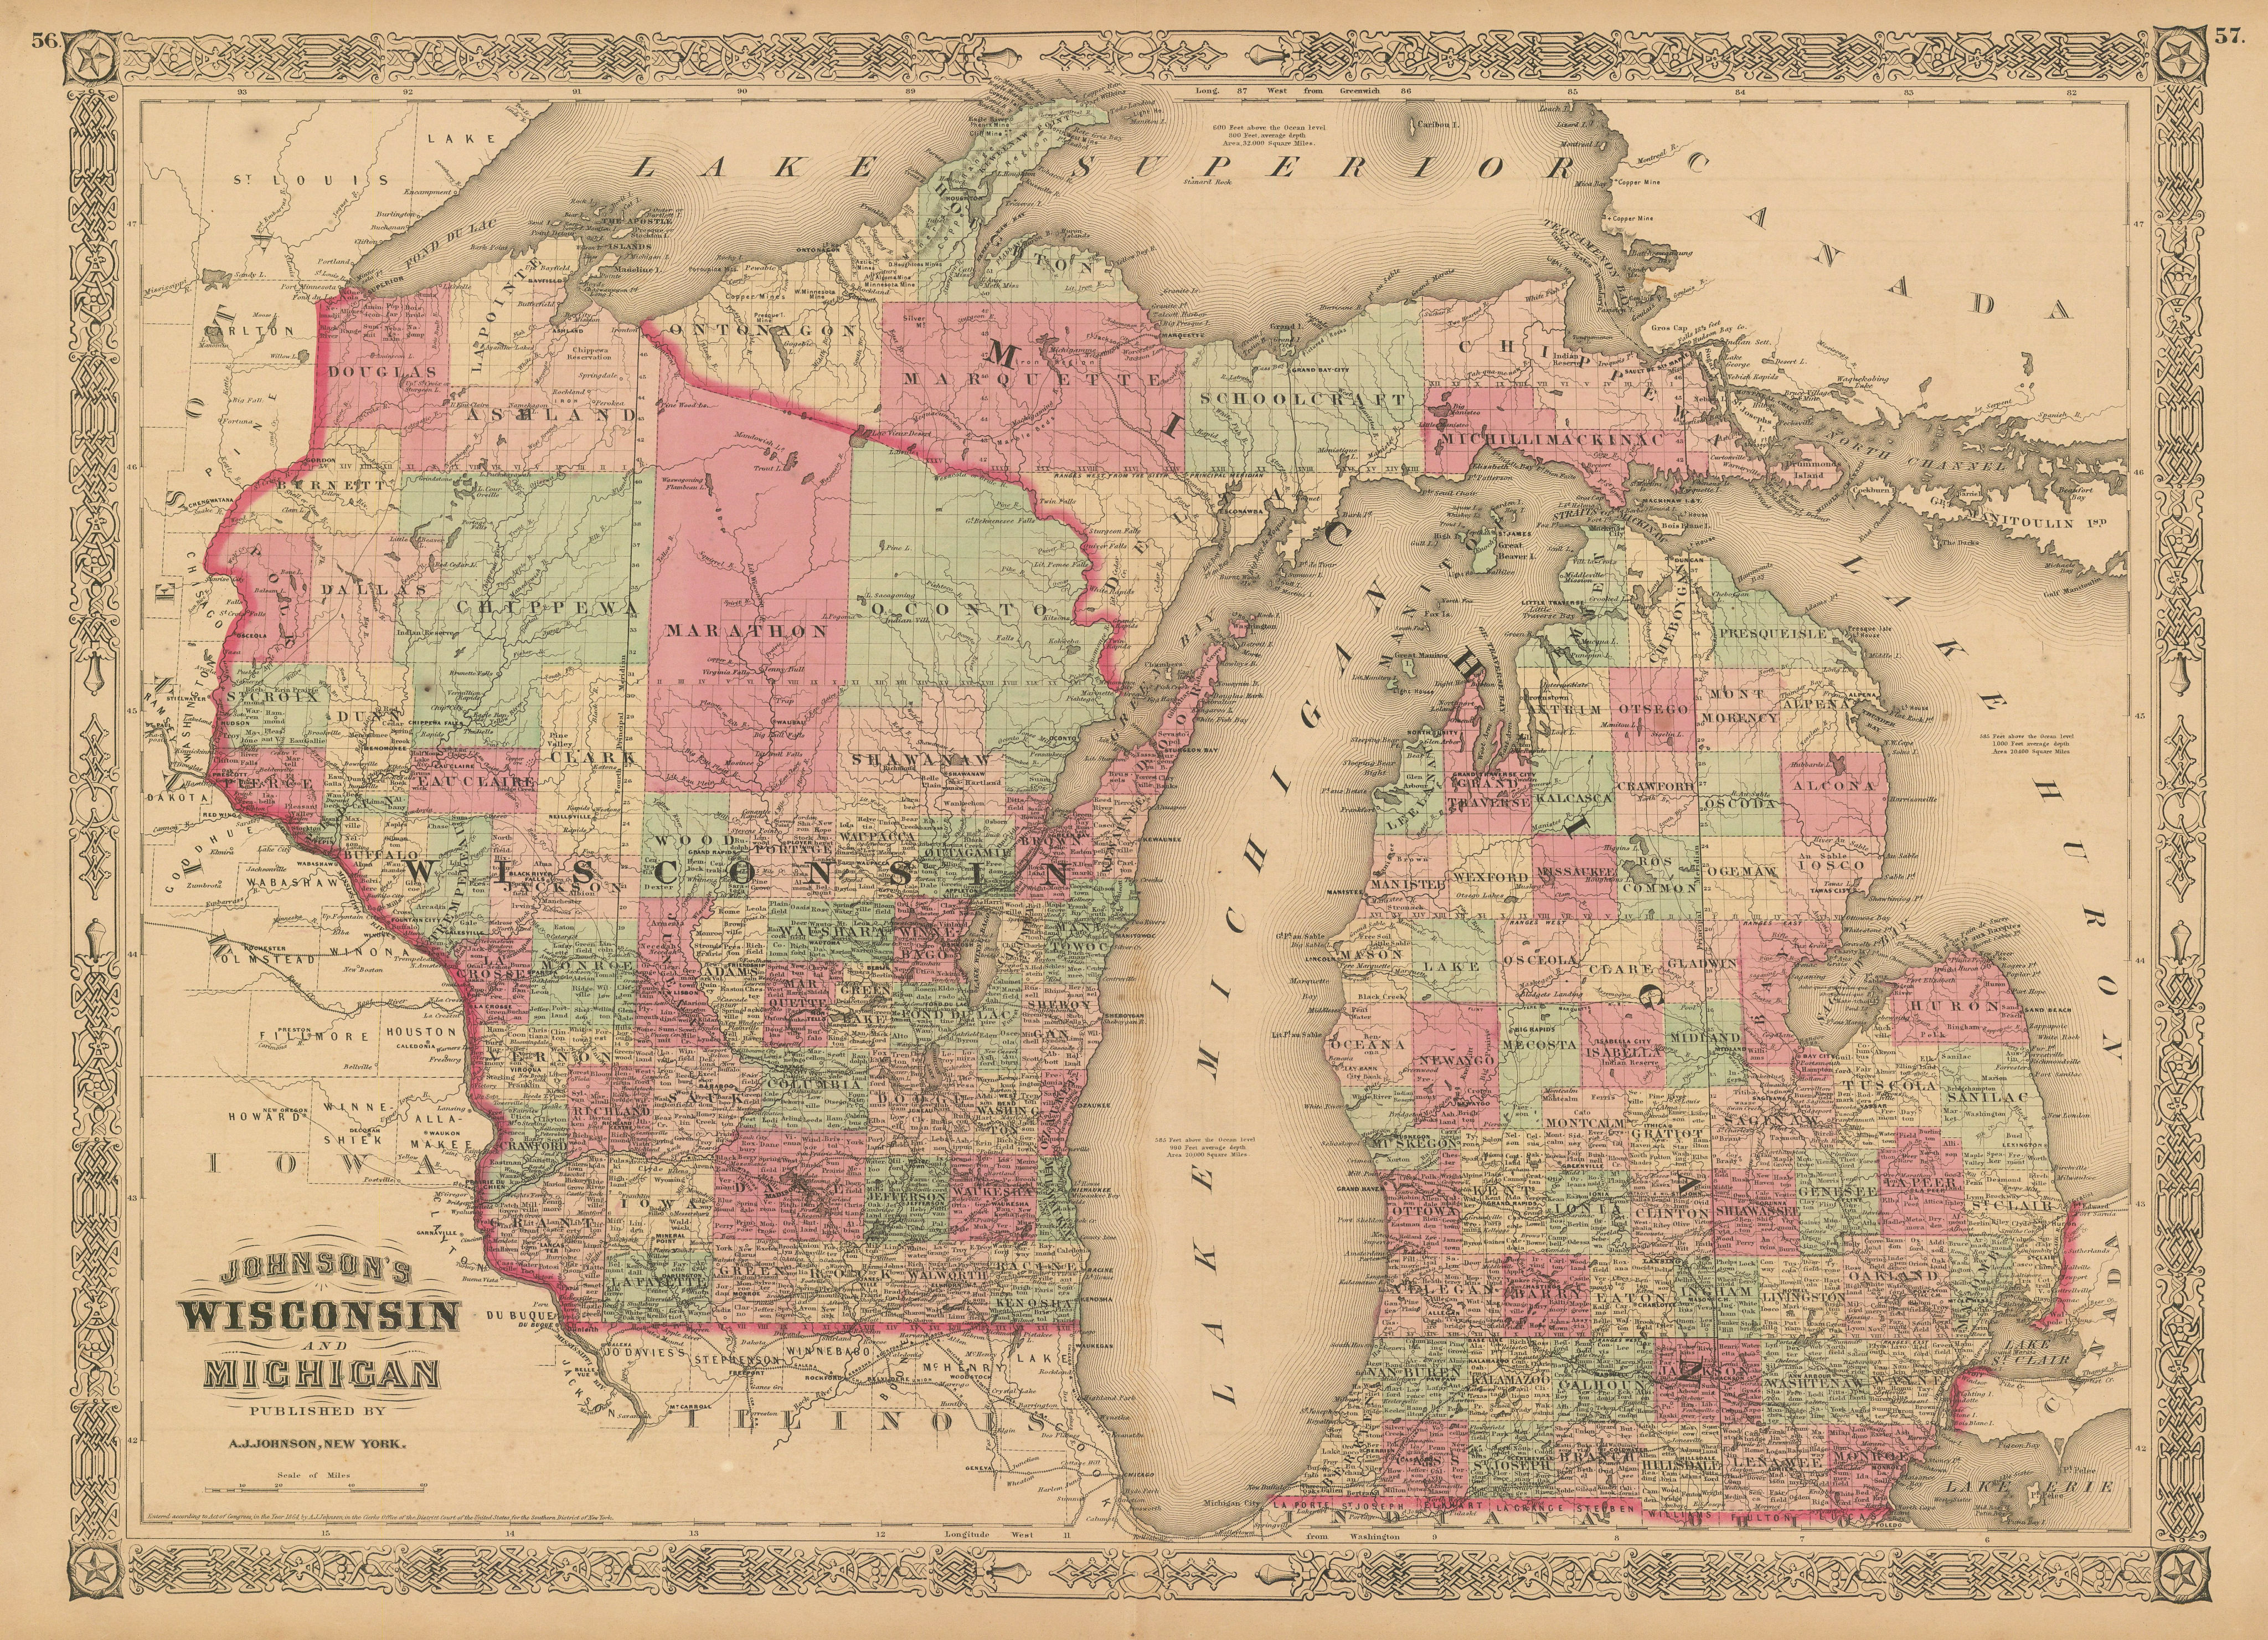 Associate Product Johnson's Wisconsin & Michigan. State map showing counties. Great Lakes 1867